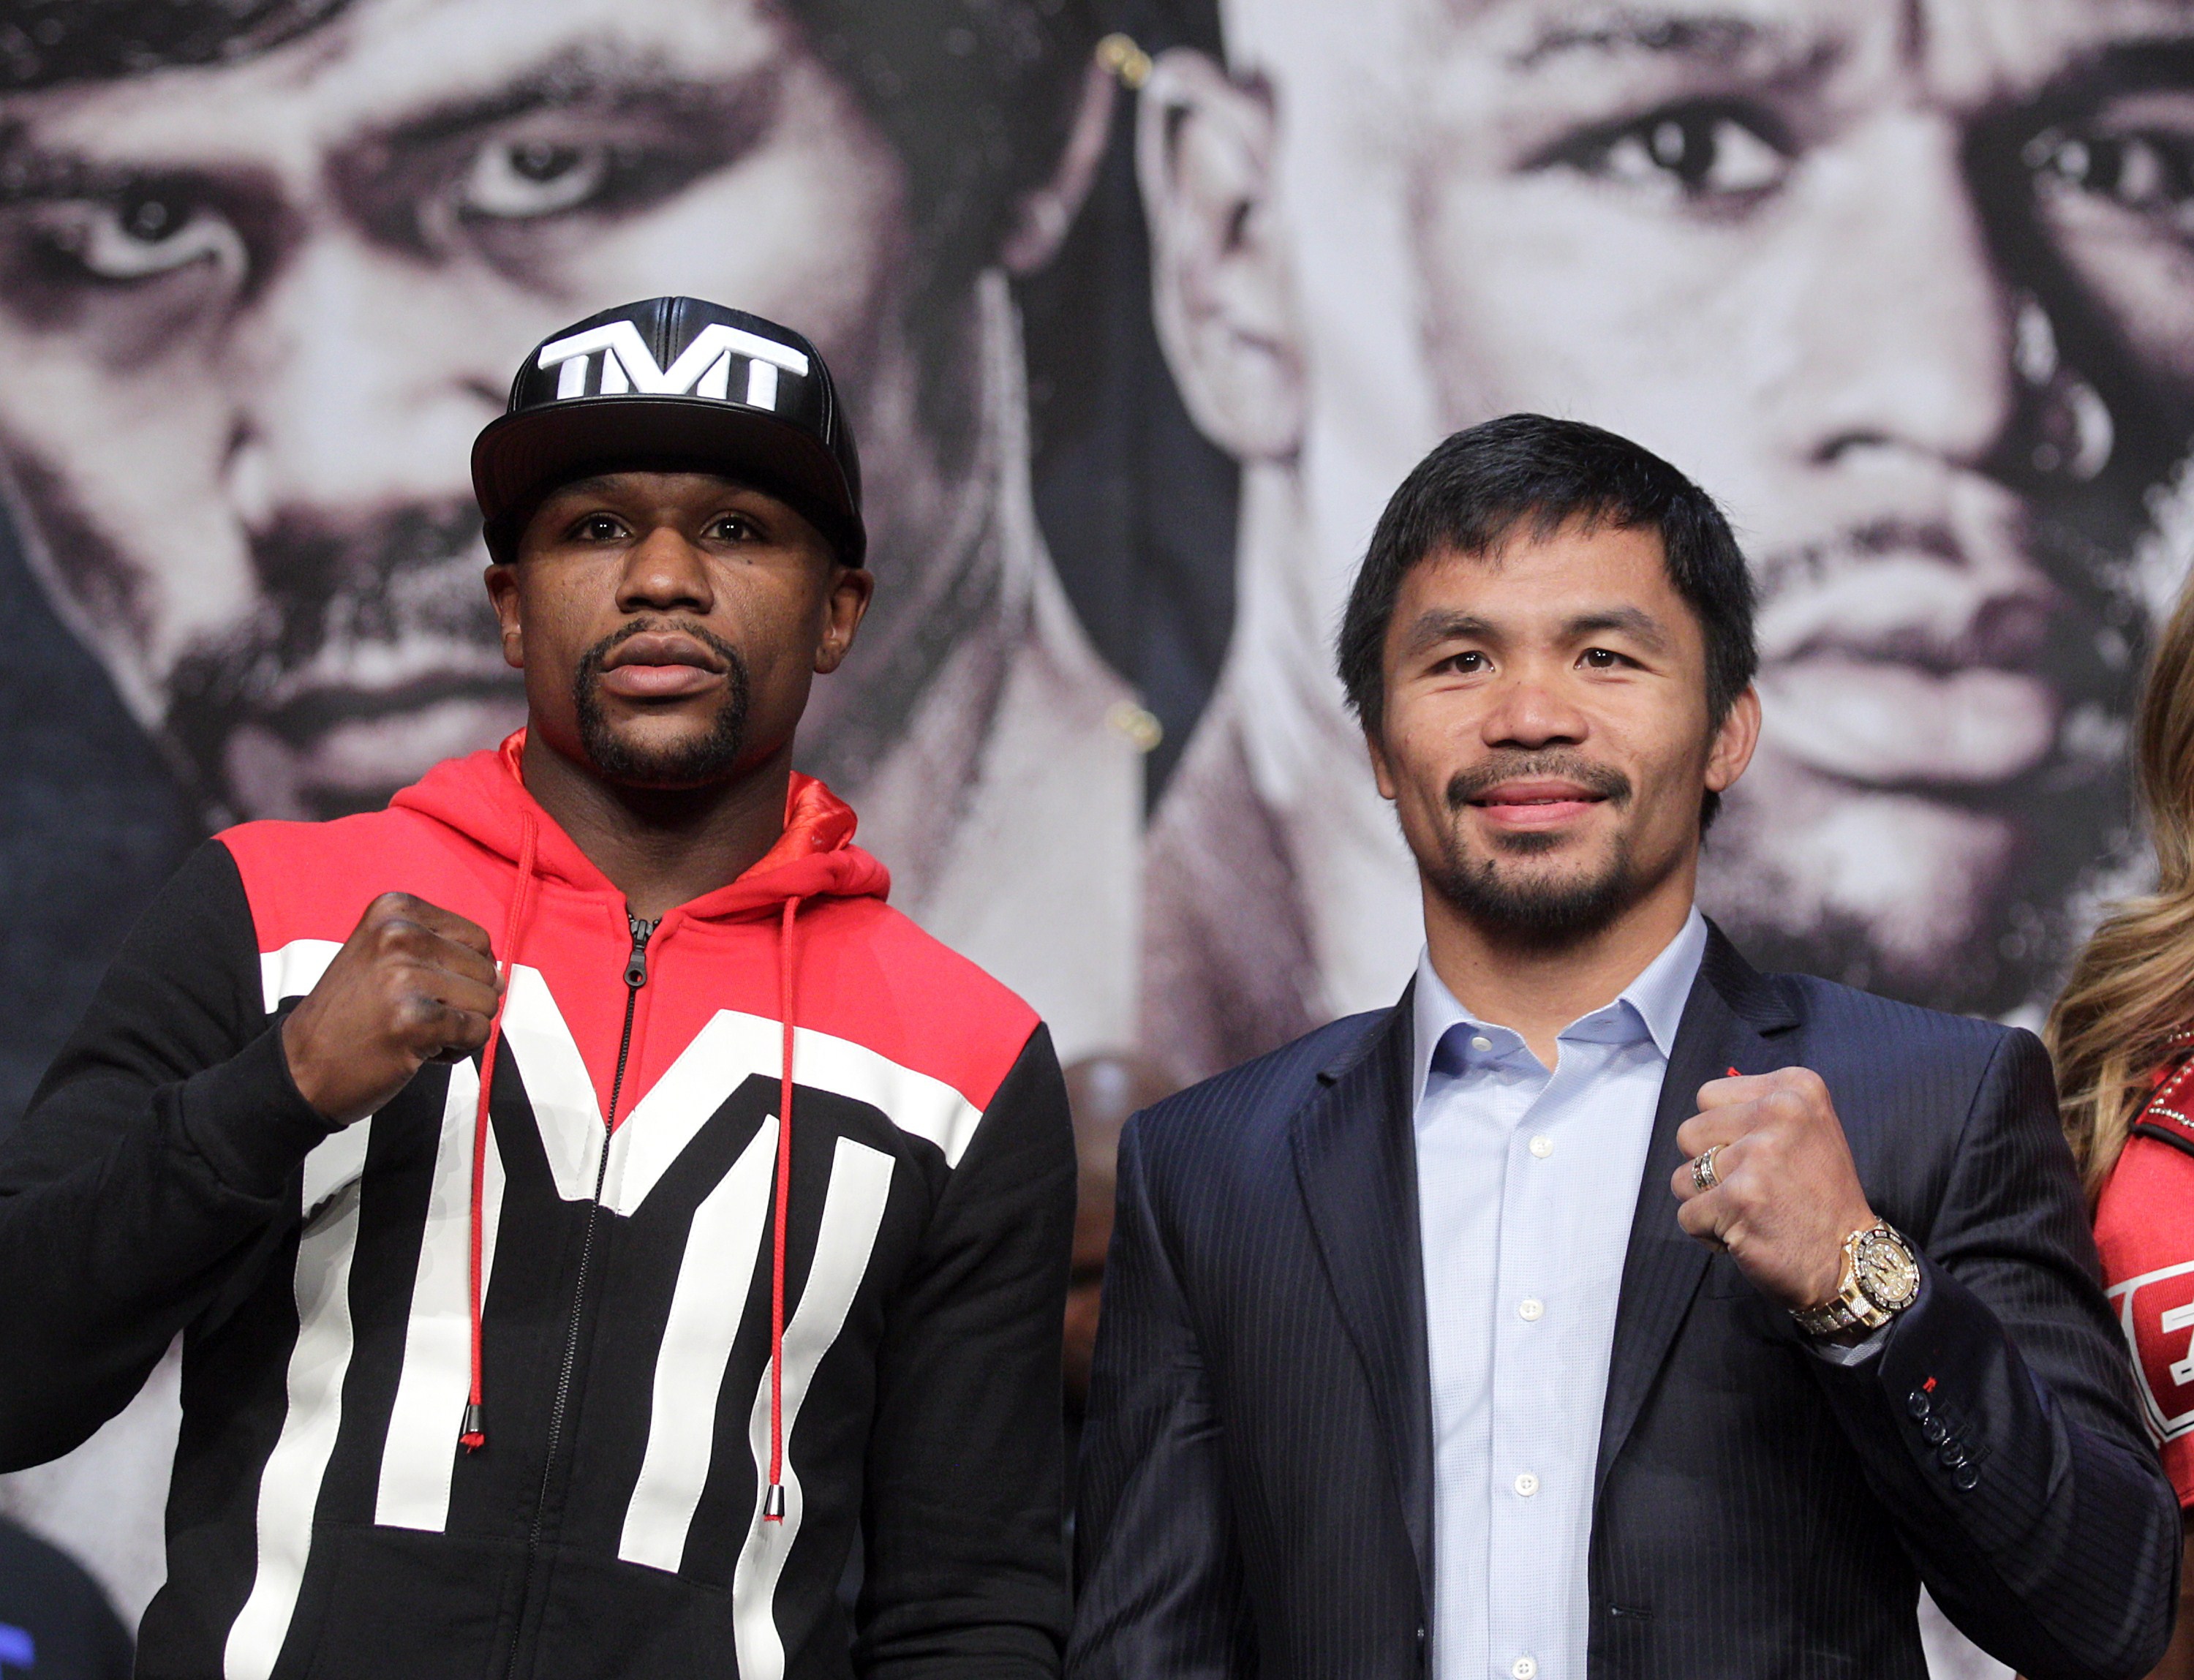 Floyd Mayweather Jr. (L) and Manny Pacquiao pose during a news conference at the KA Theatre at the MGM Grand Hotel &amp; Casino on April 29, 2015 in Las Vegas, Nevada. (JOHN GURZINSKI&amp;mdash;AFP/Getty Images)